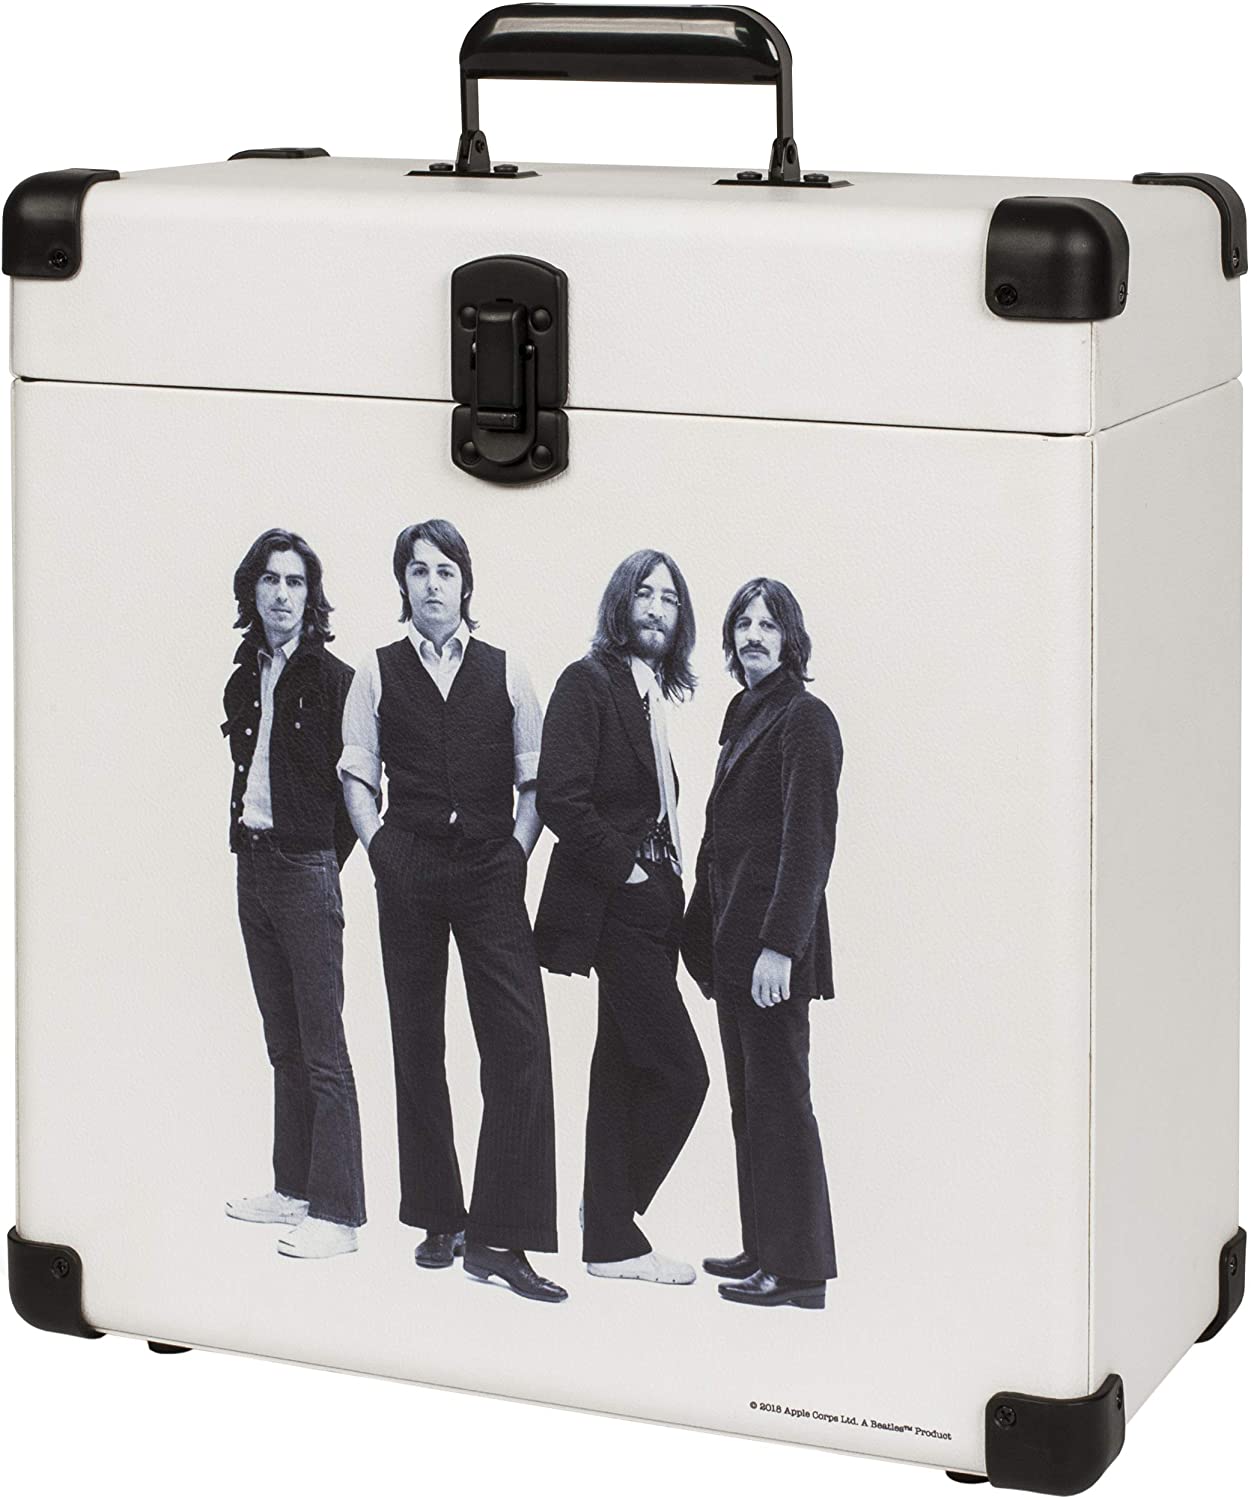 New Beatles record carrying cases.